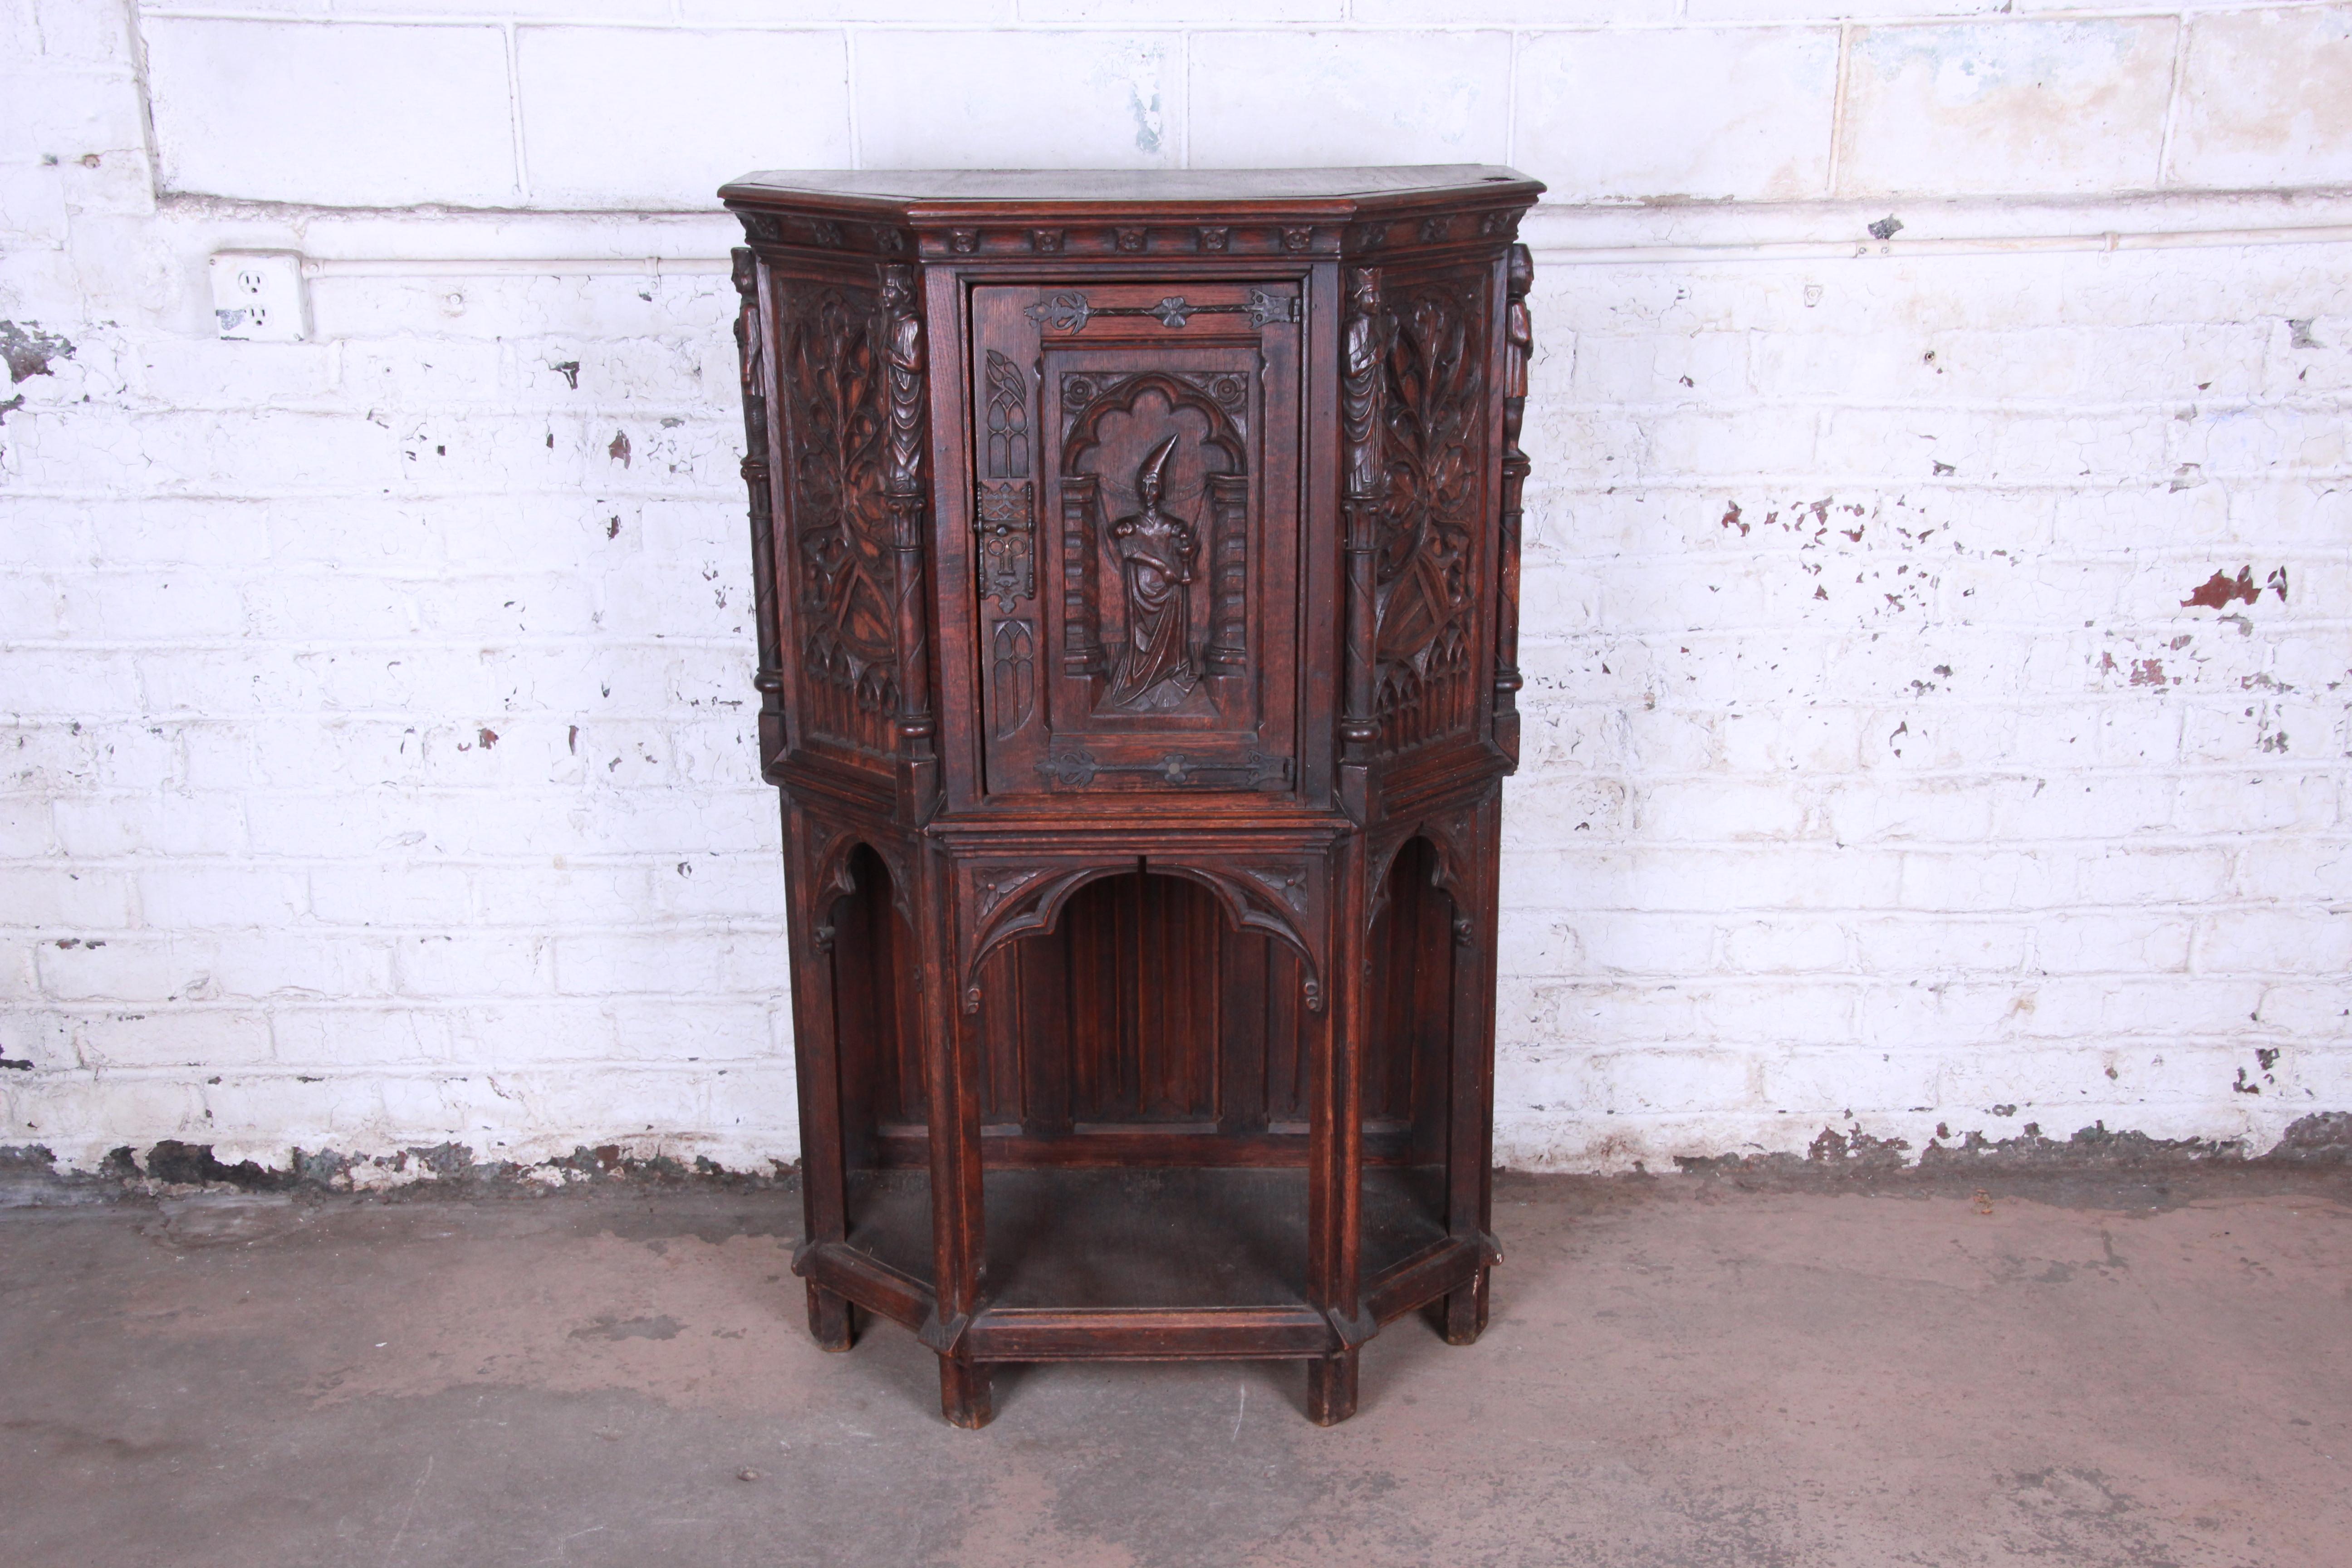 An outstanding 19th century ornately carved oak gothic bar cabinet. The cabinet features solid oak construction, with stunning carved wood details. A single door carved with a young prince or nobleman opens to reveal a shelved storage area for